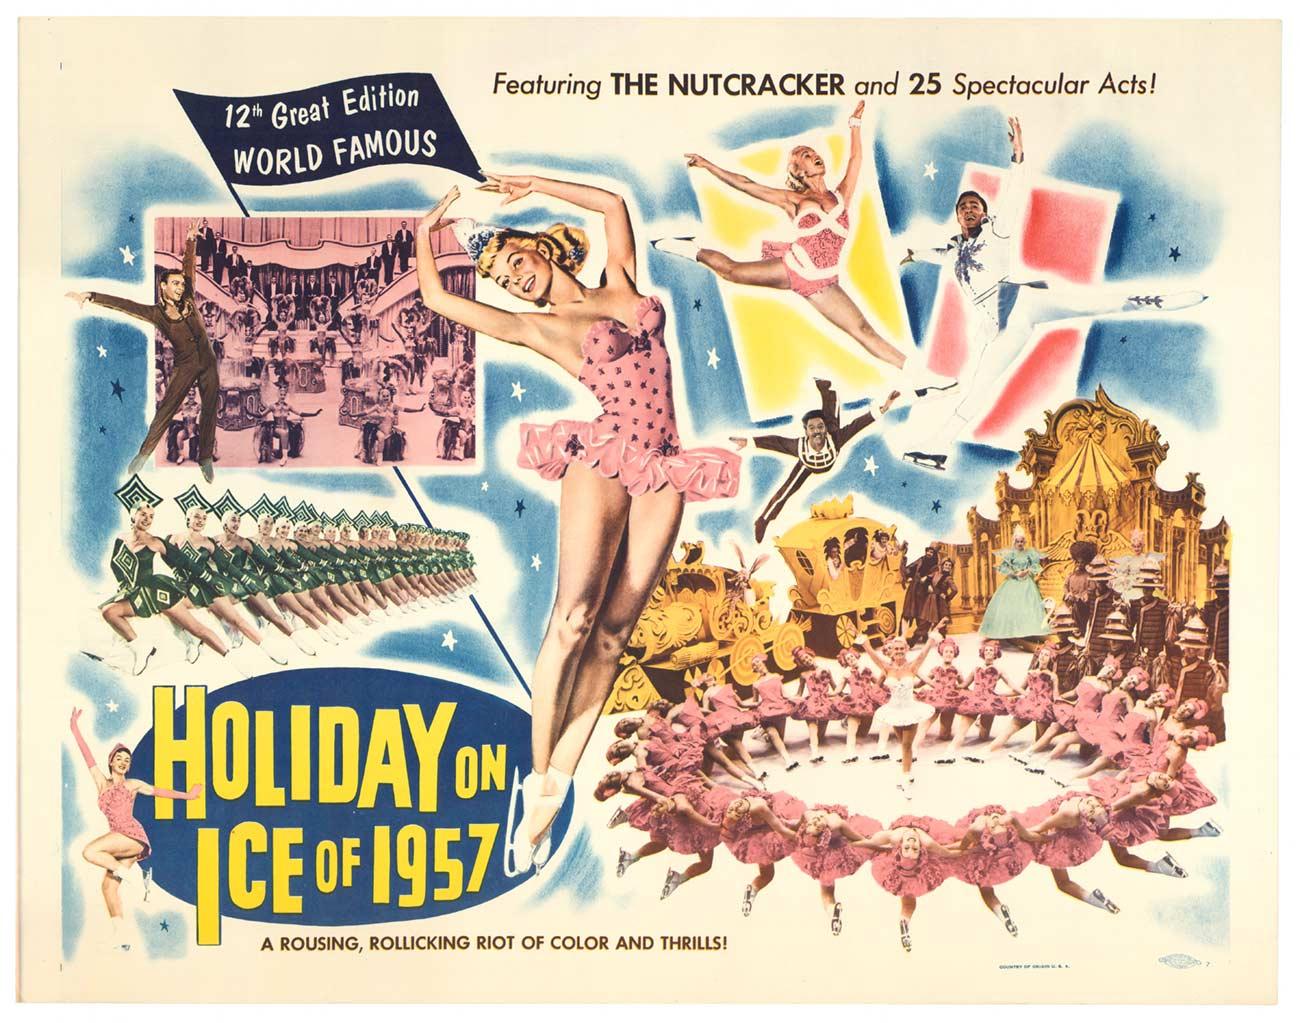 Unknown Figurative Print - Original "Holiday on Ice of 1957" vintage movie poster